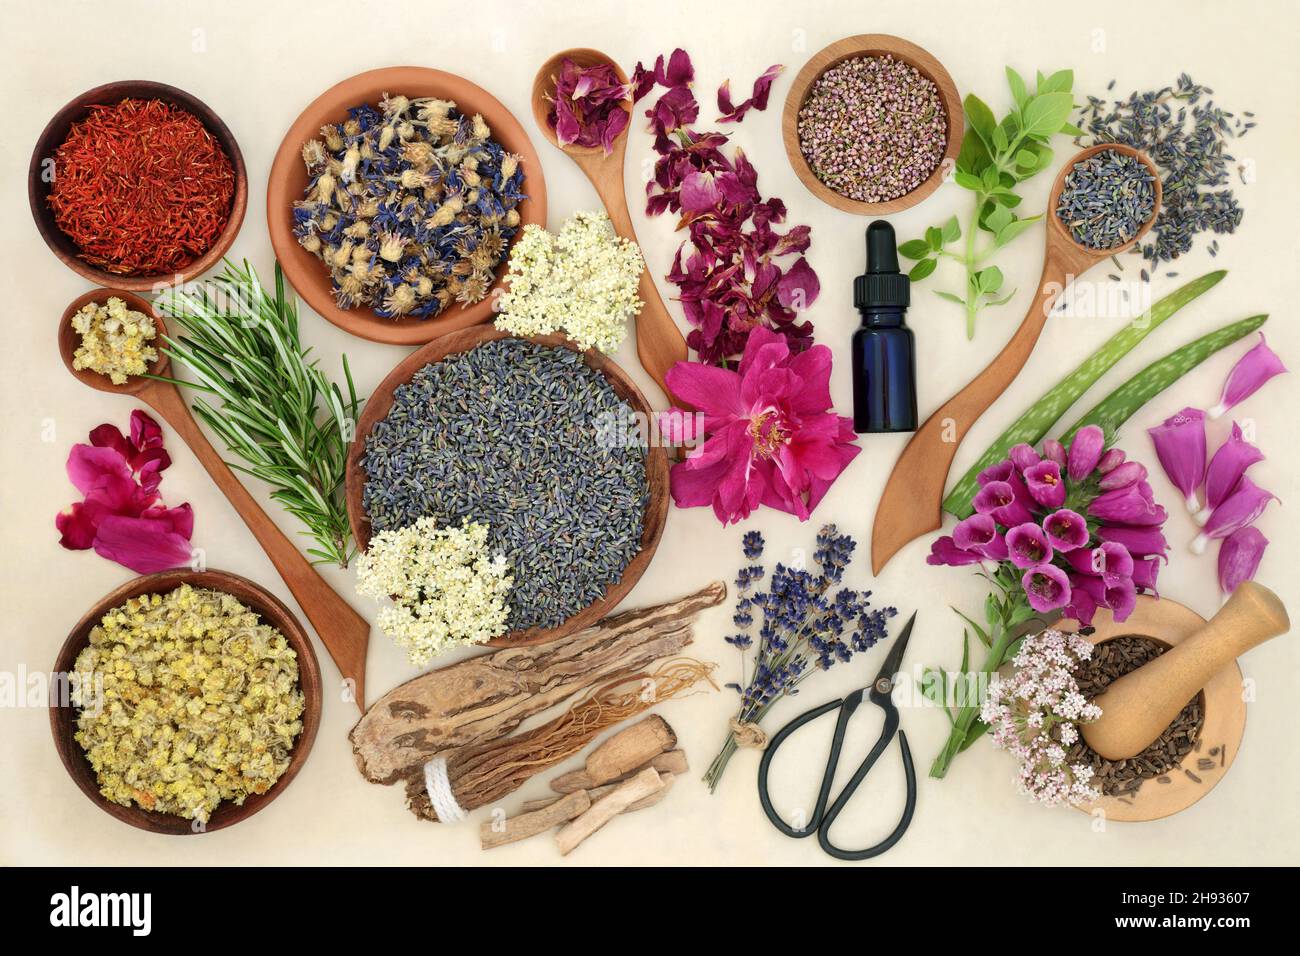 Natural herbal plant medicine preparation with dried and fresh herbs flowers in a mortar, bowls and loose. Alternative health care concept. Stock Photo